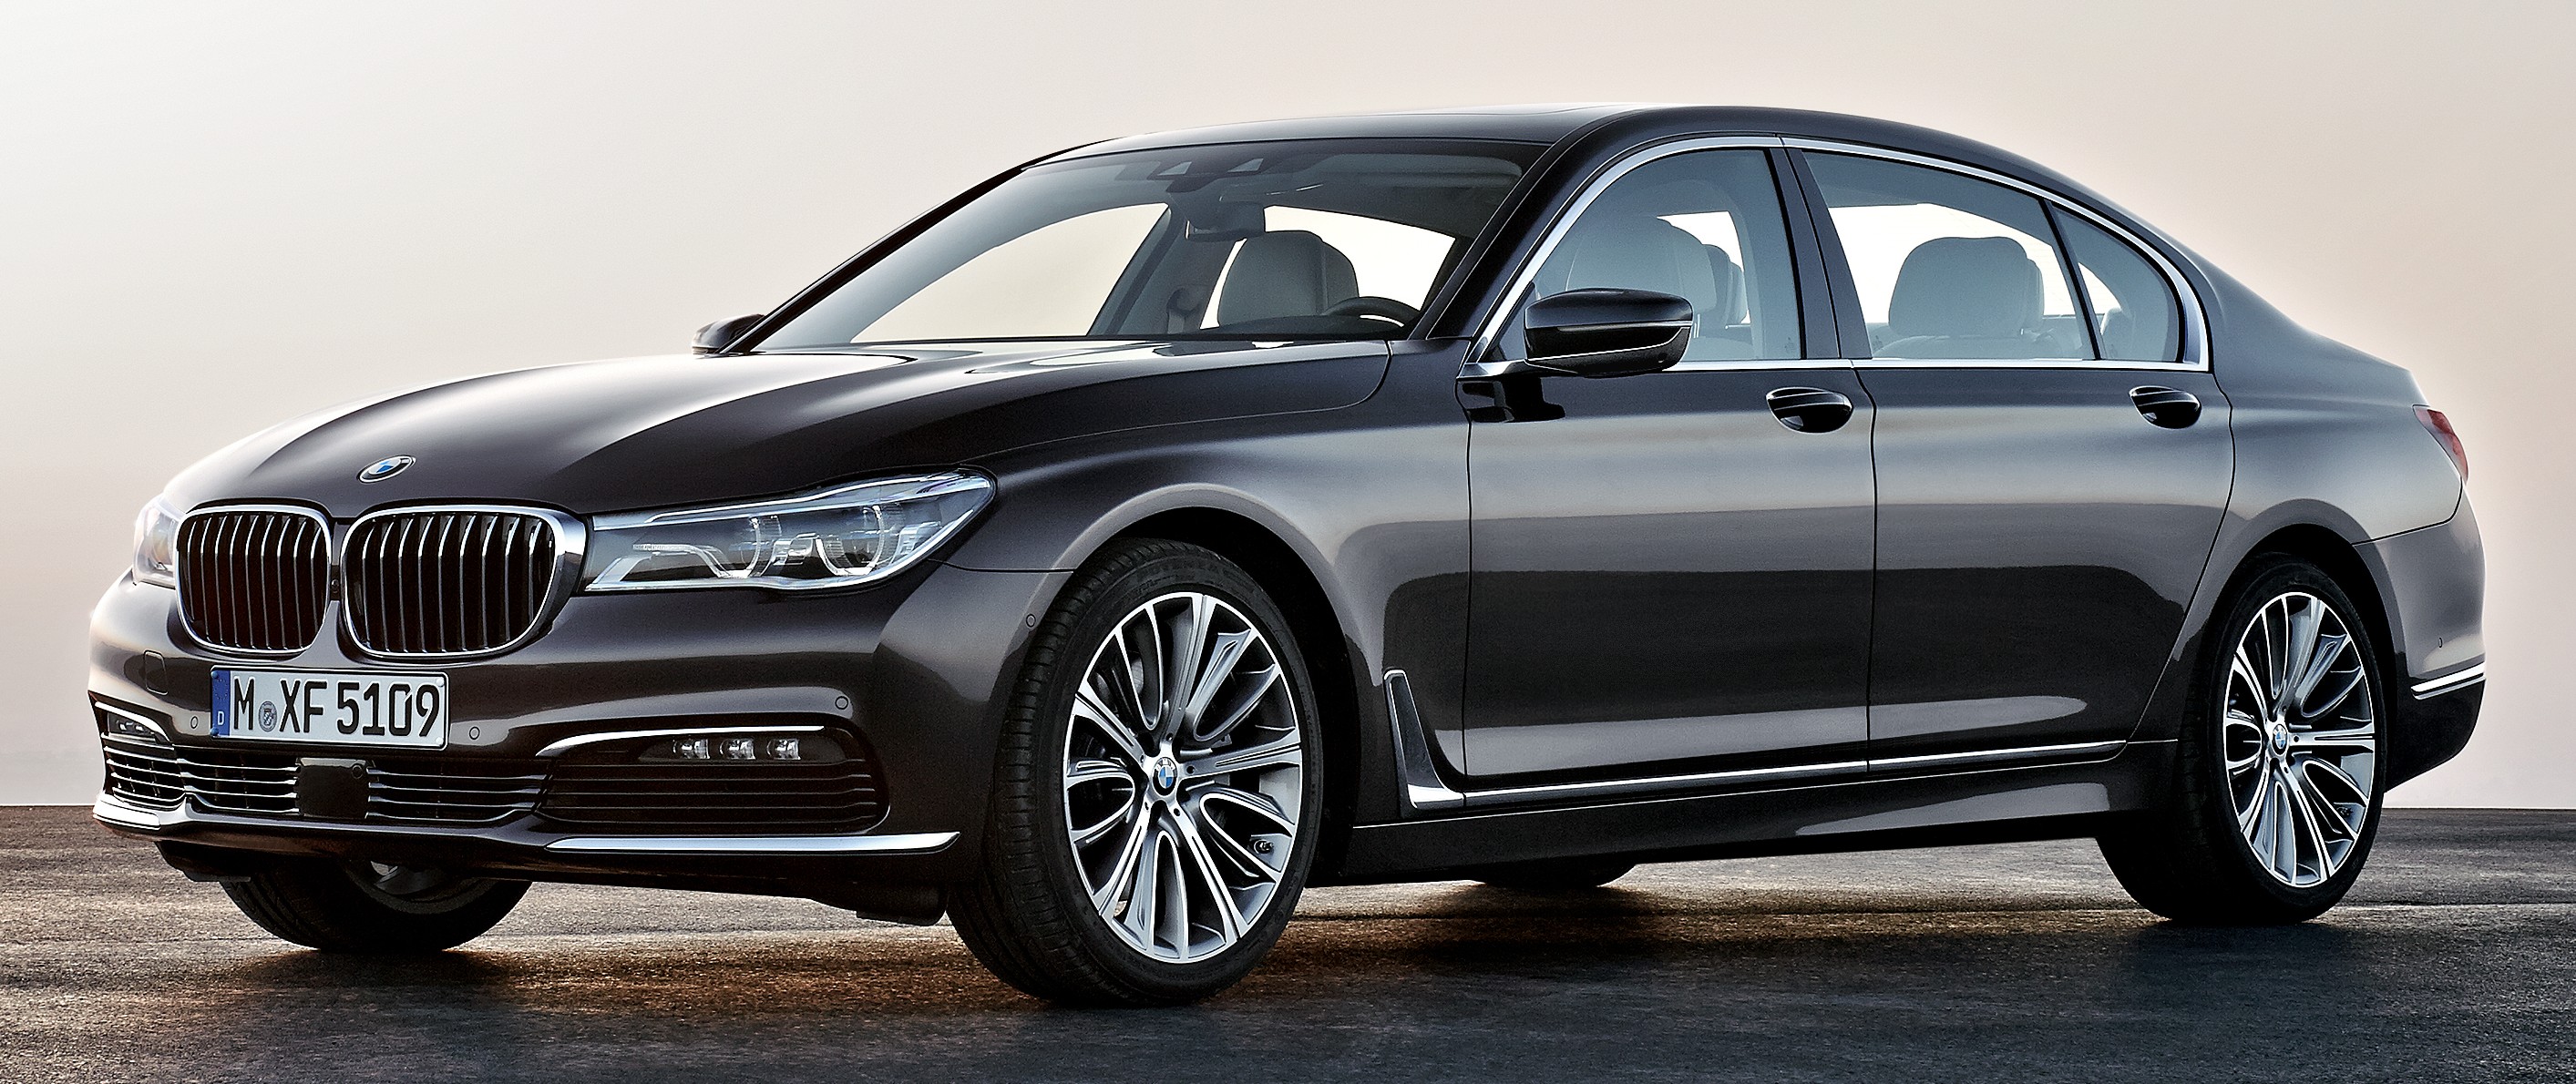 G11/G12 BMW 7 Series officially unveiled - full details